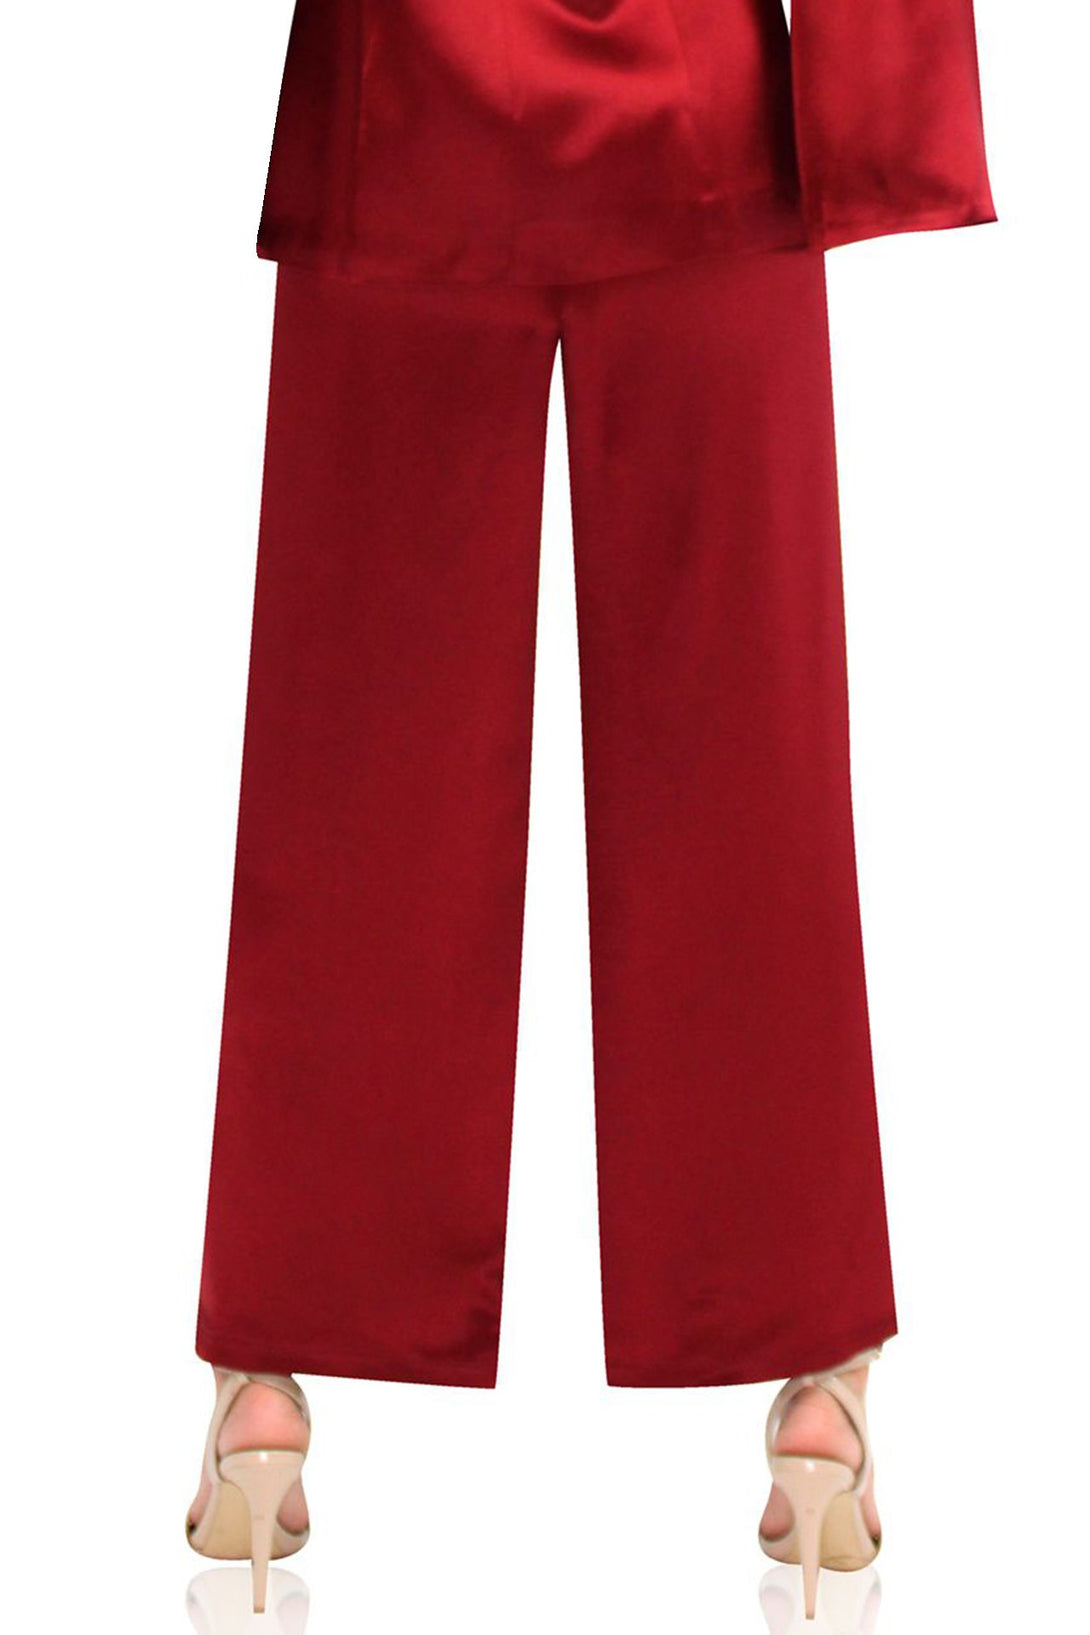 Kyle-Richard-Designer-Straight-Fit-Womens-Pants-In-Red